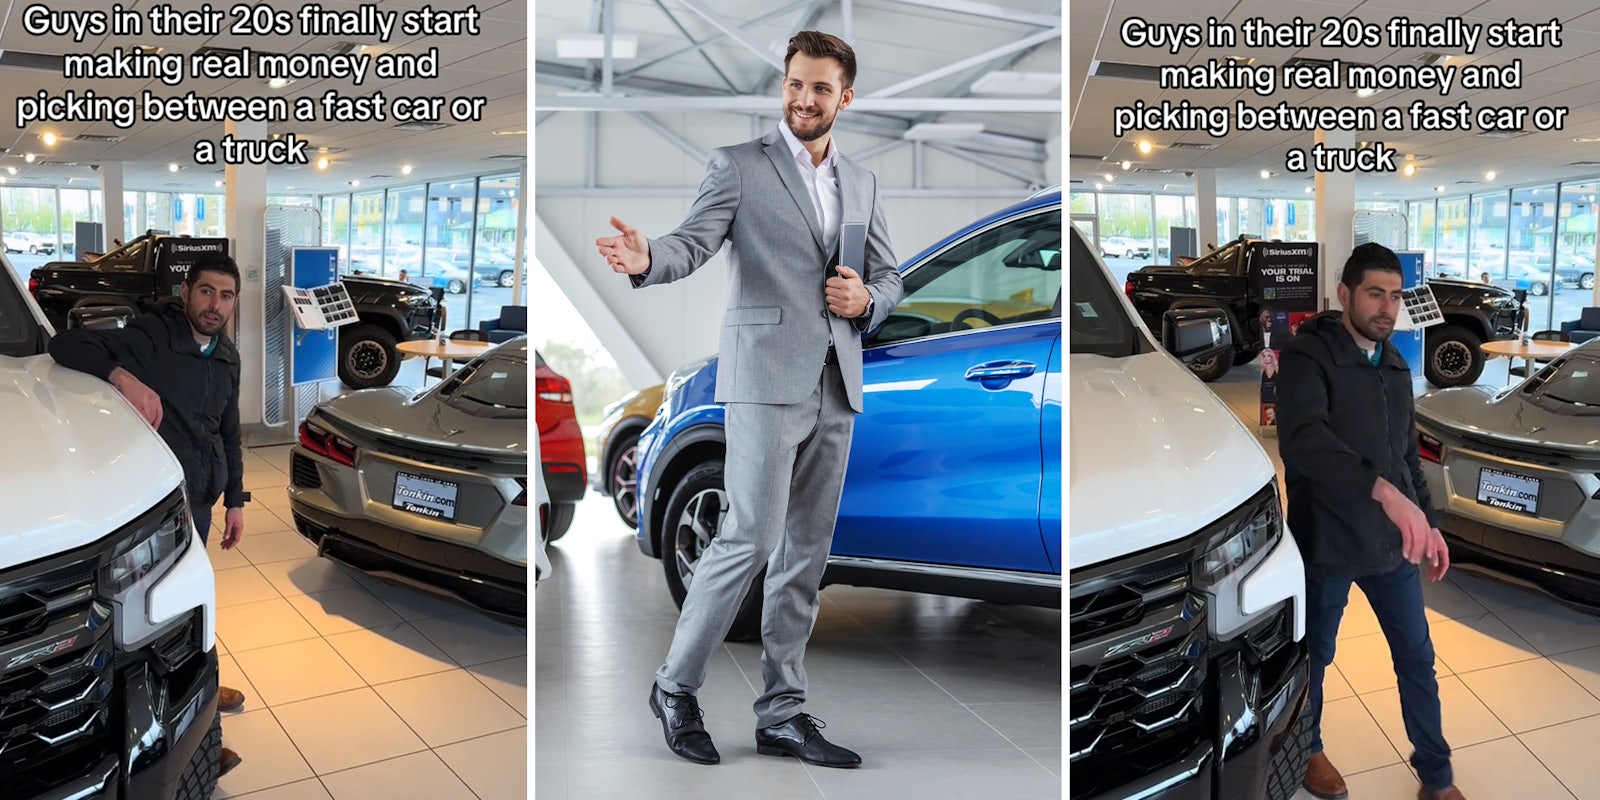 Car salesman calls out guys in their 20s for always buying one of 2 cars